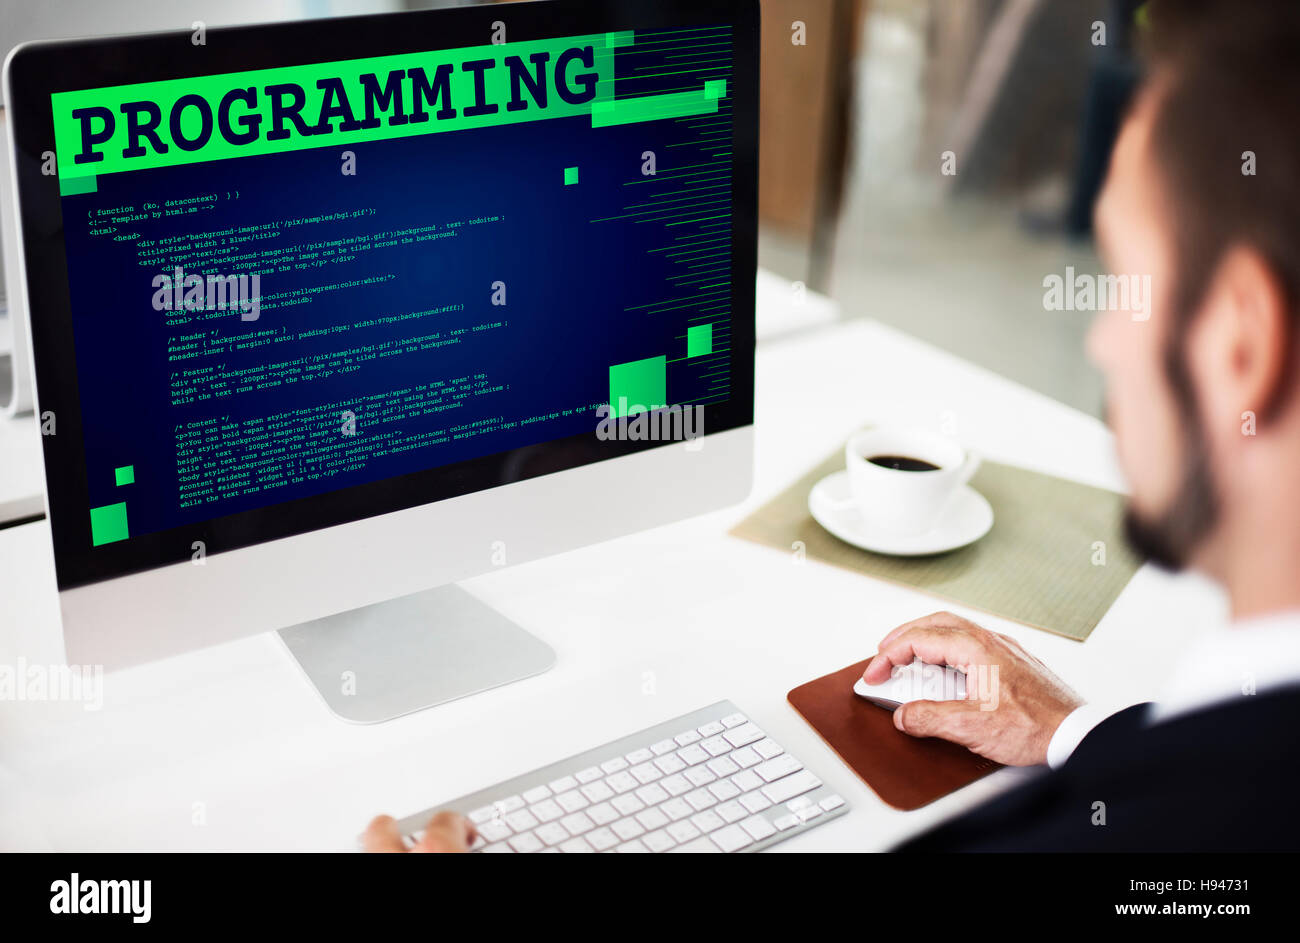 Programming Scheduling Digital Application Code Concept Stock Photo